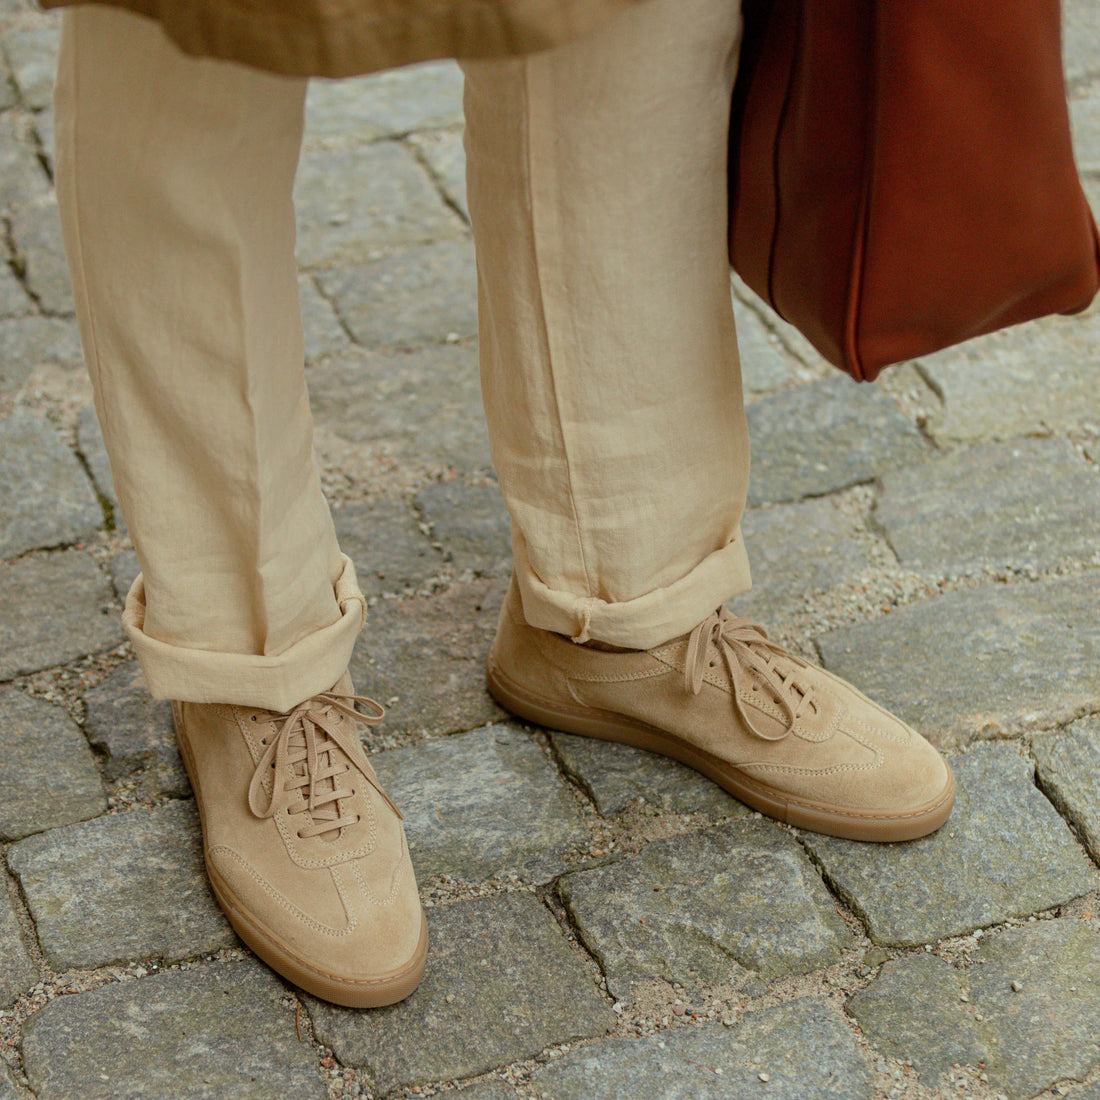 A person wearing beige trousers and beige lace-up shoes stands on a cobblestone path, holding a brown leather bag.